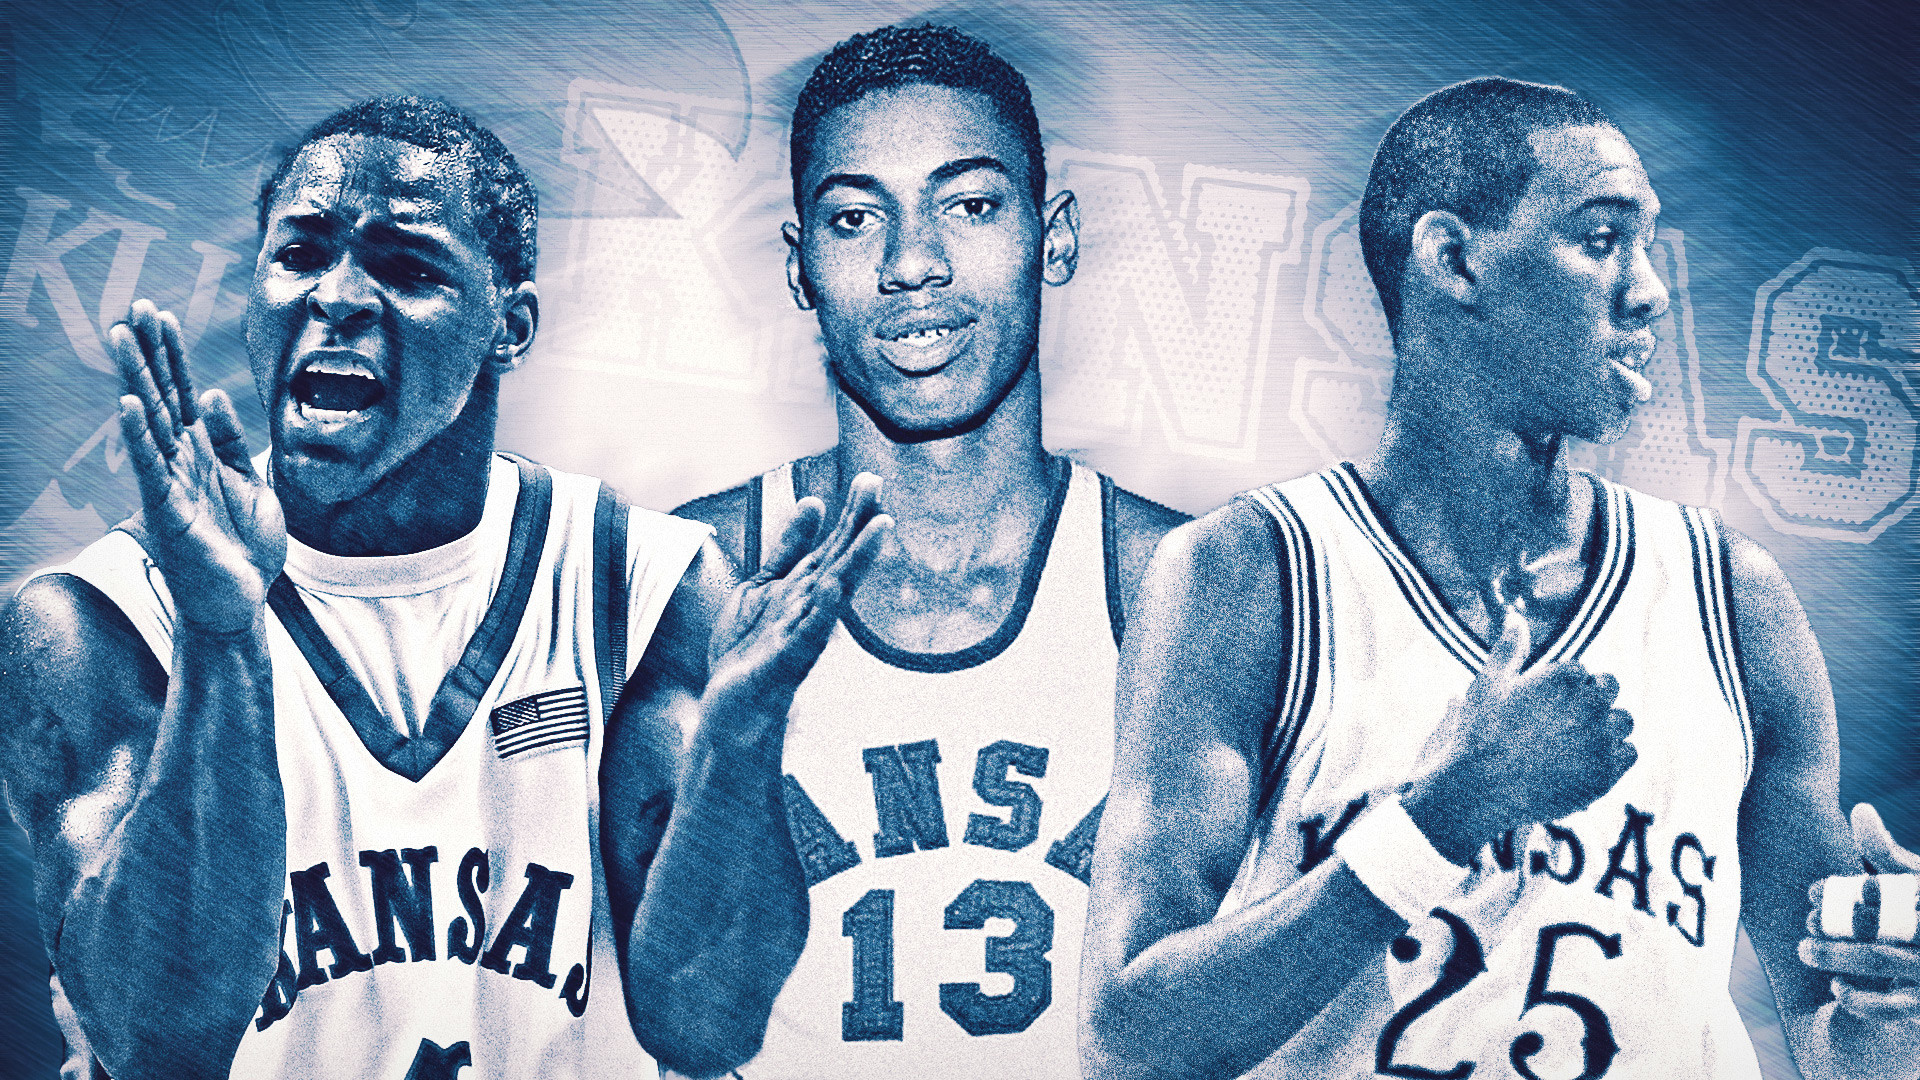 1920x1080 10 greatest Kansas basketball players of all time